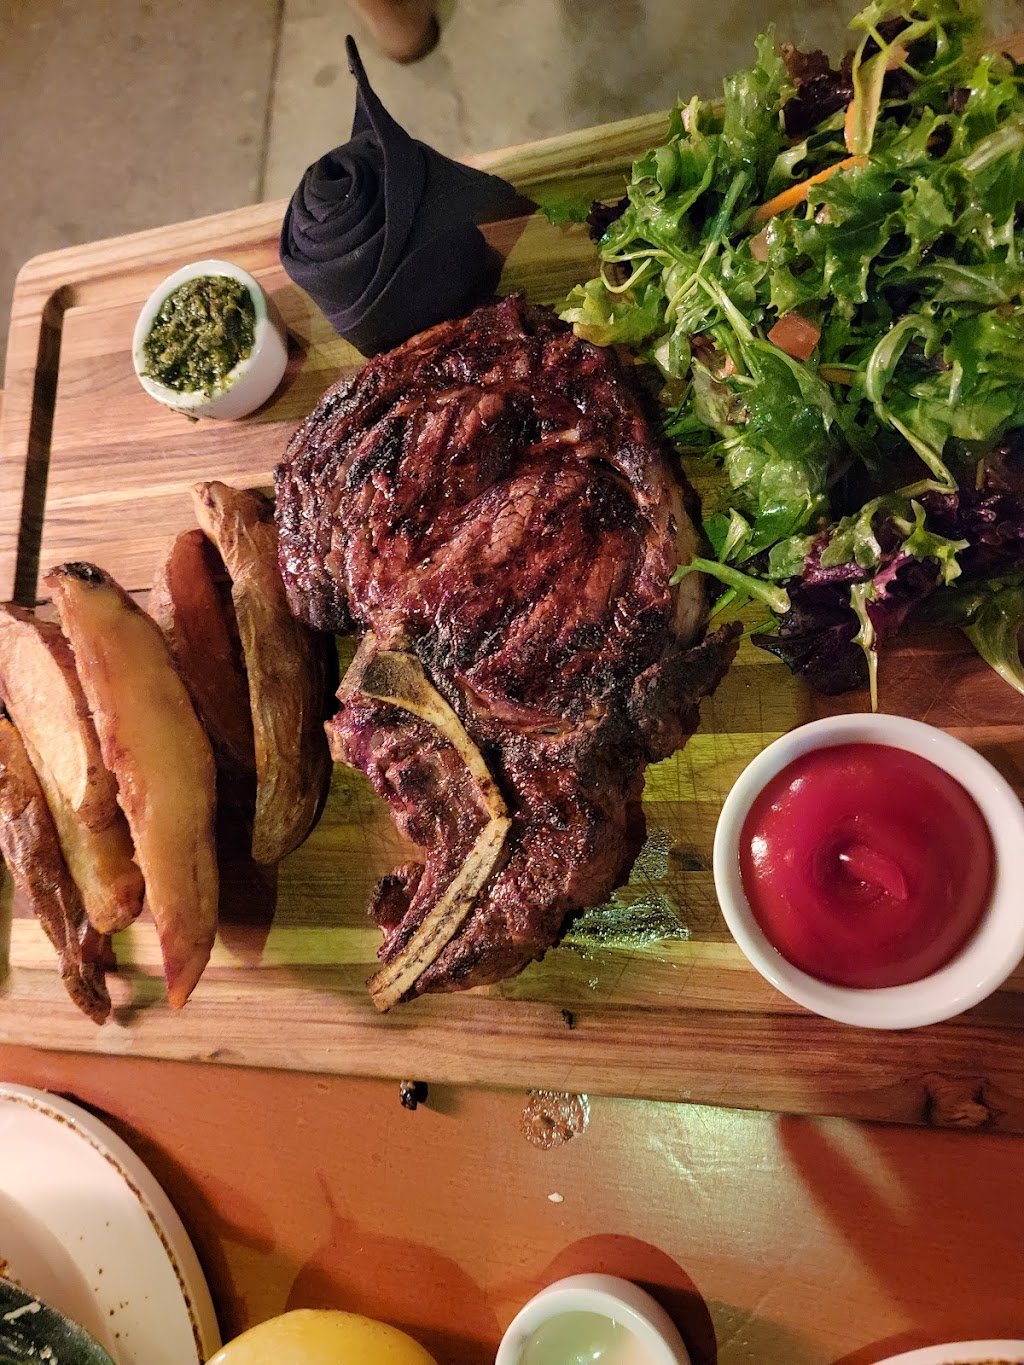 Charcoal Grill & Bar | Photo 3 of 10 | Address: 7563 Beverly Blvd, Los Angeles, CA 90036, USA | Phone: (323) 433-4787